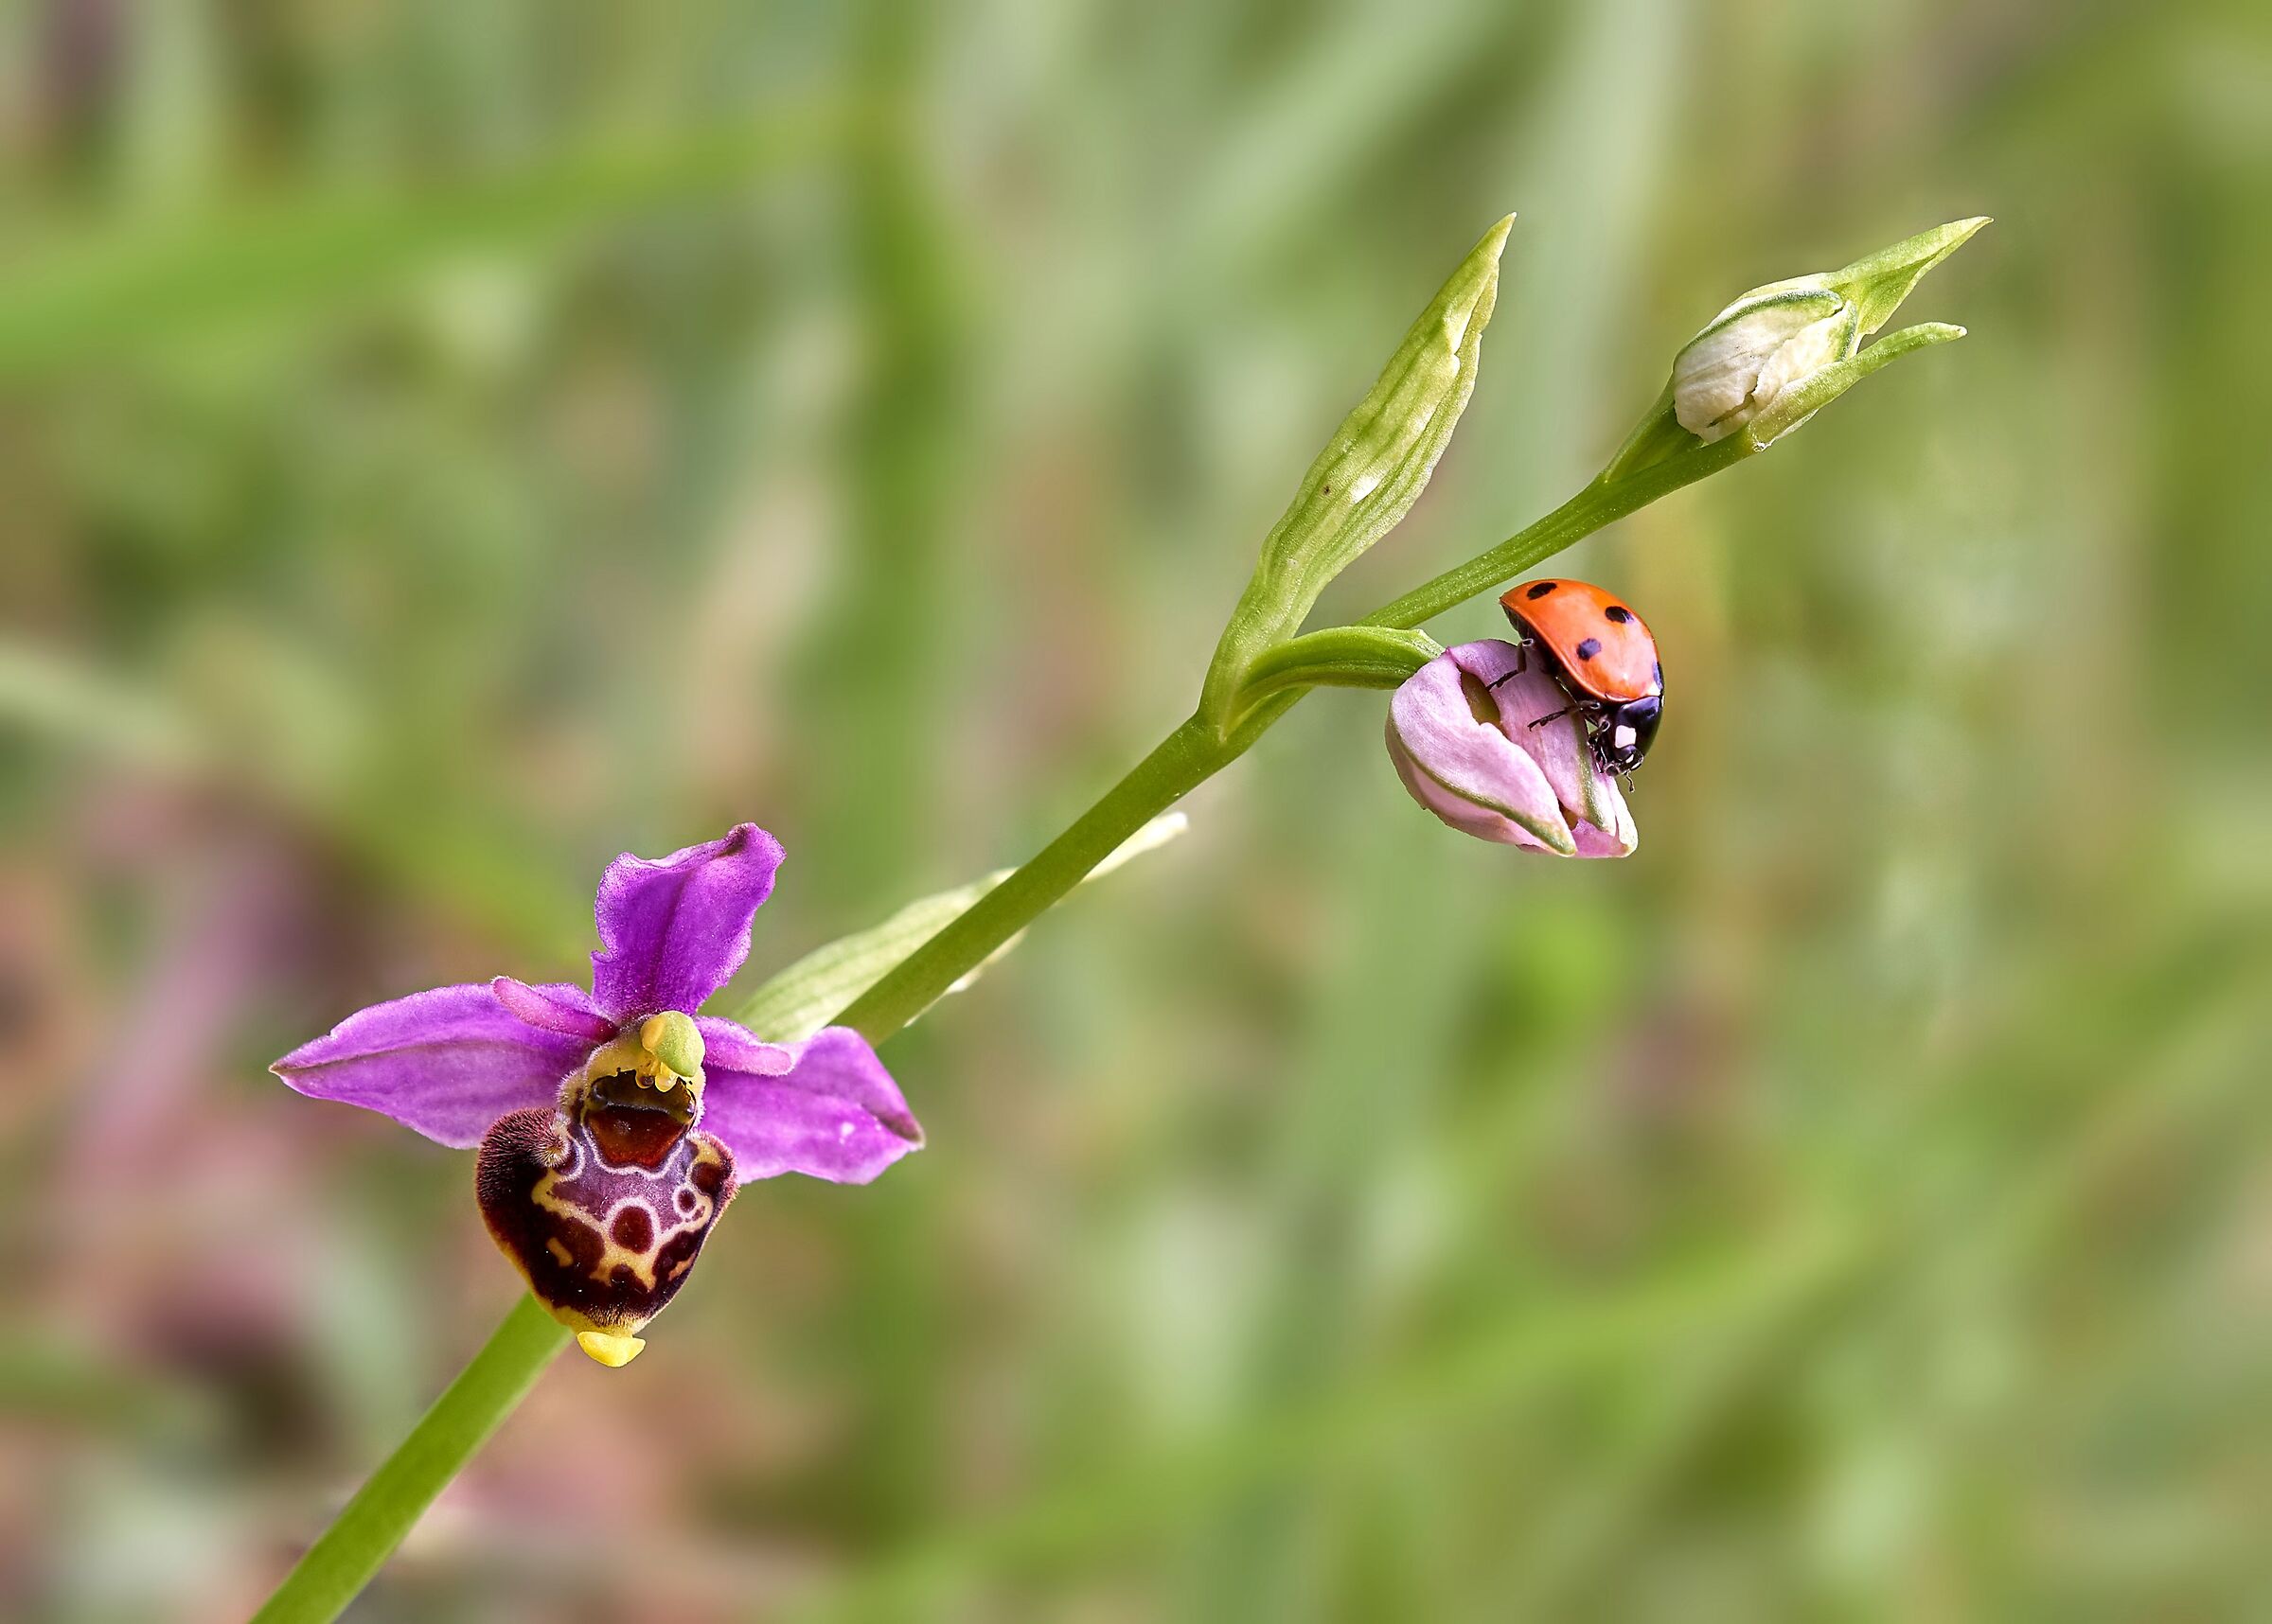 The orchid and the ladybug...